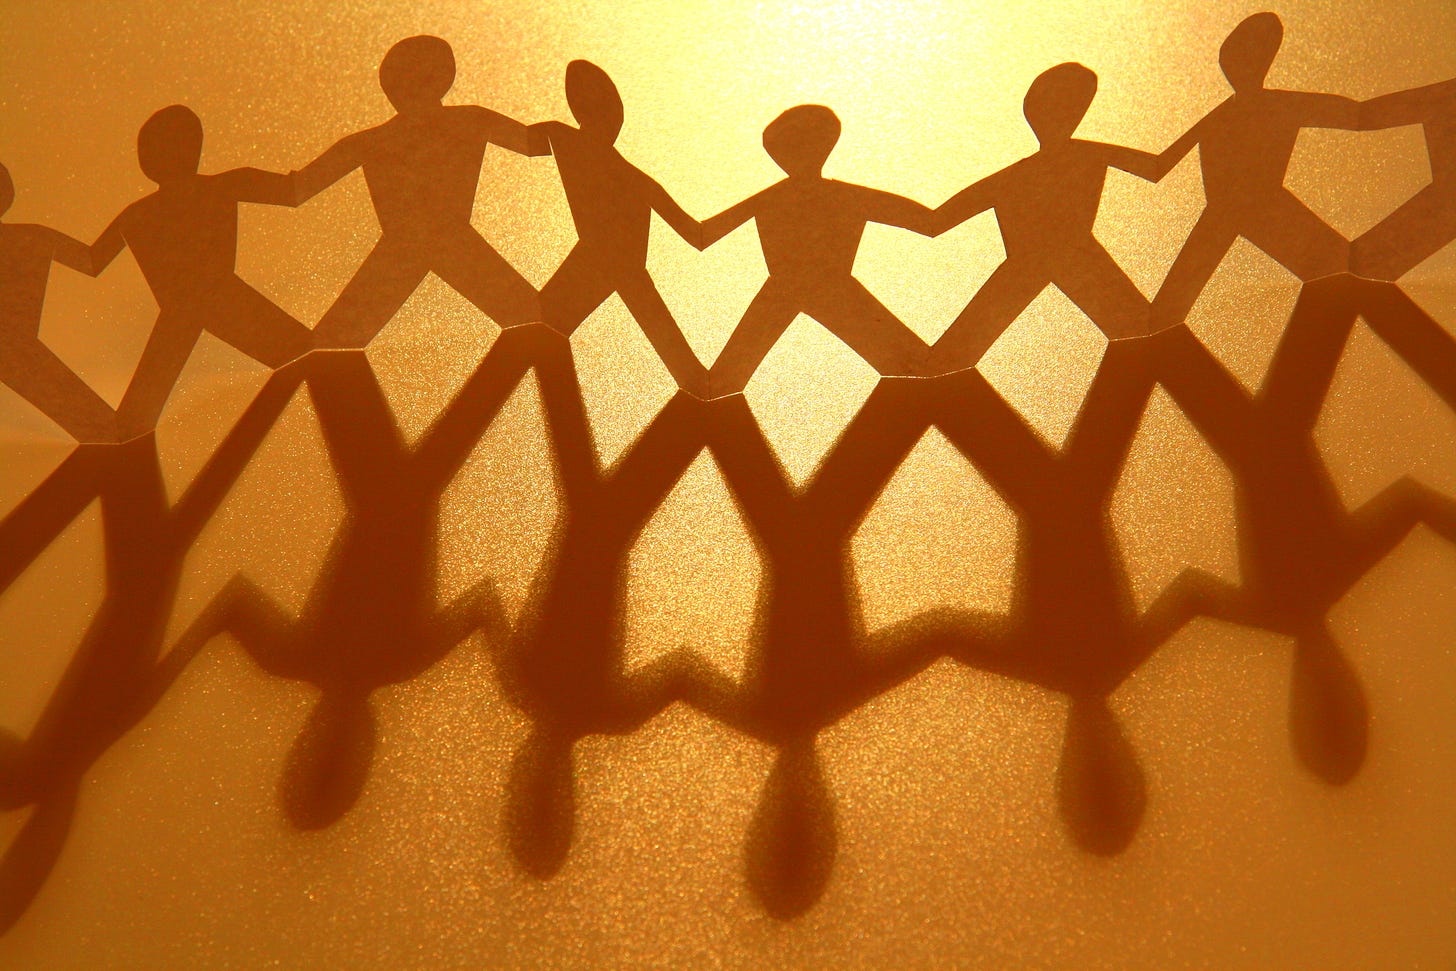 A line of connected paper cut-out people with a golden light shining from the background casting a long shadow